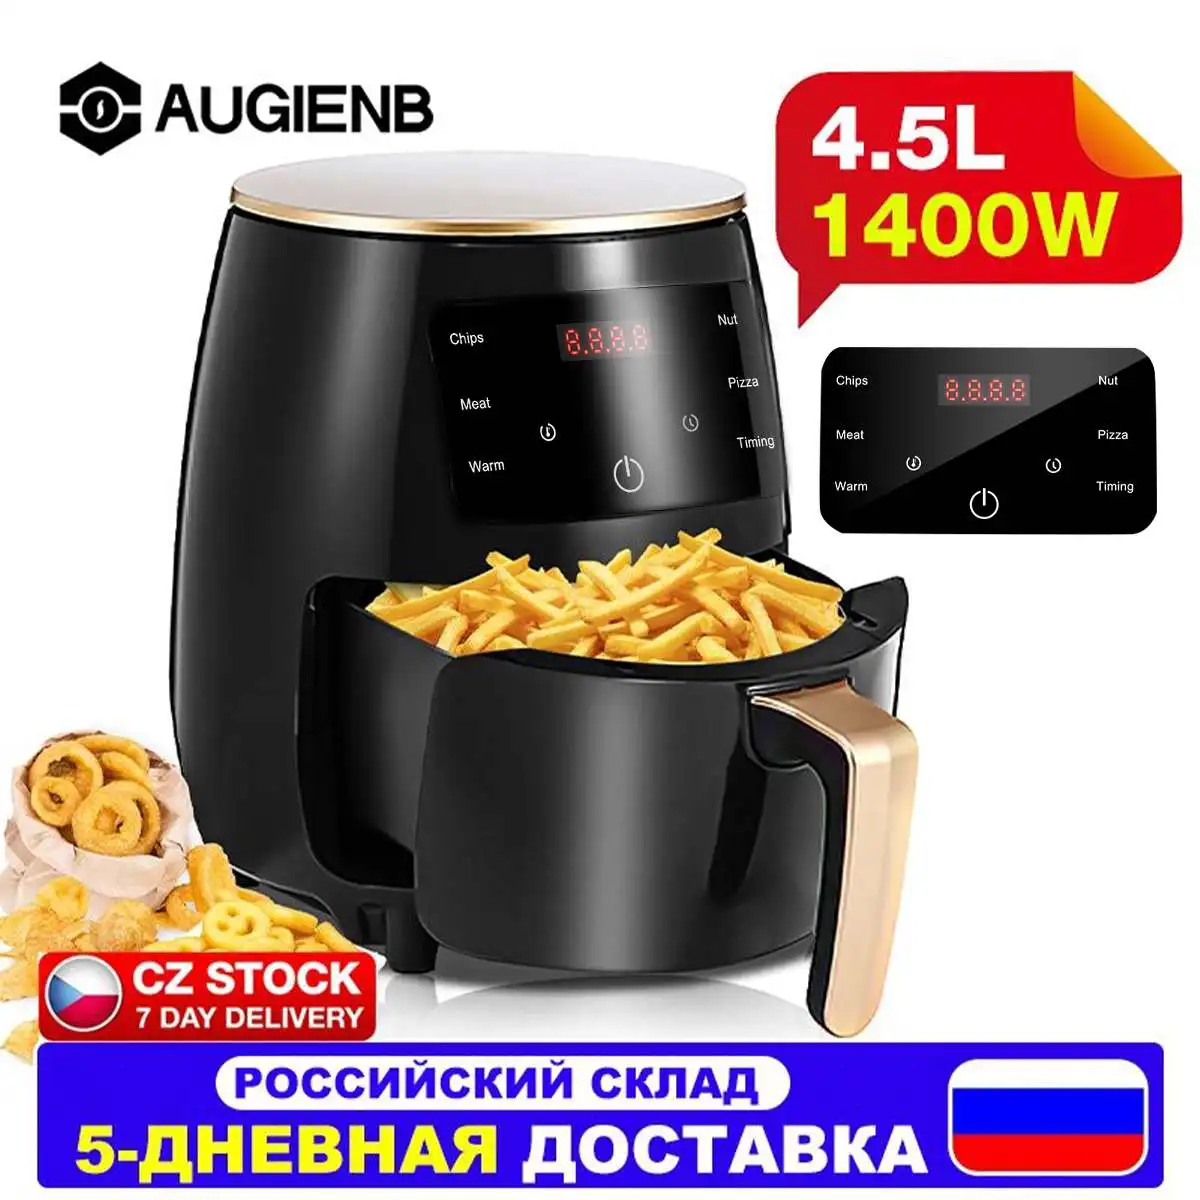 AUGIENB 4.5L 1400W Air Fryer Oil free Health Fryer Cooker Multifunction Smart Touch LCD Deep Airfryer French fries Pizza Fryer